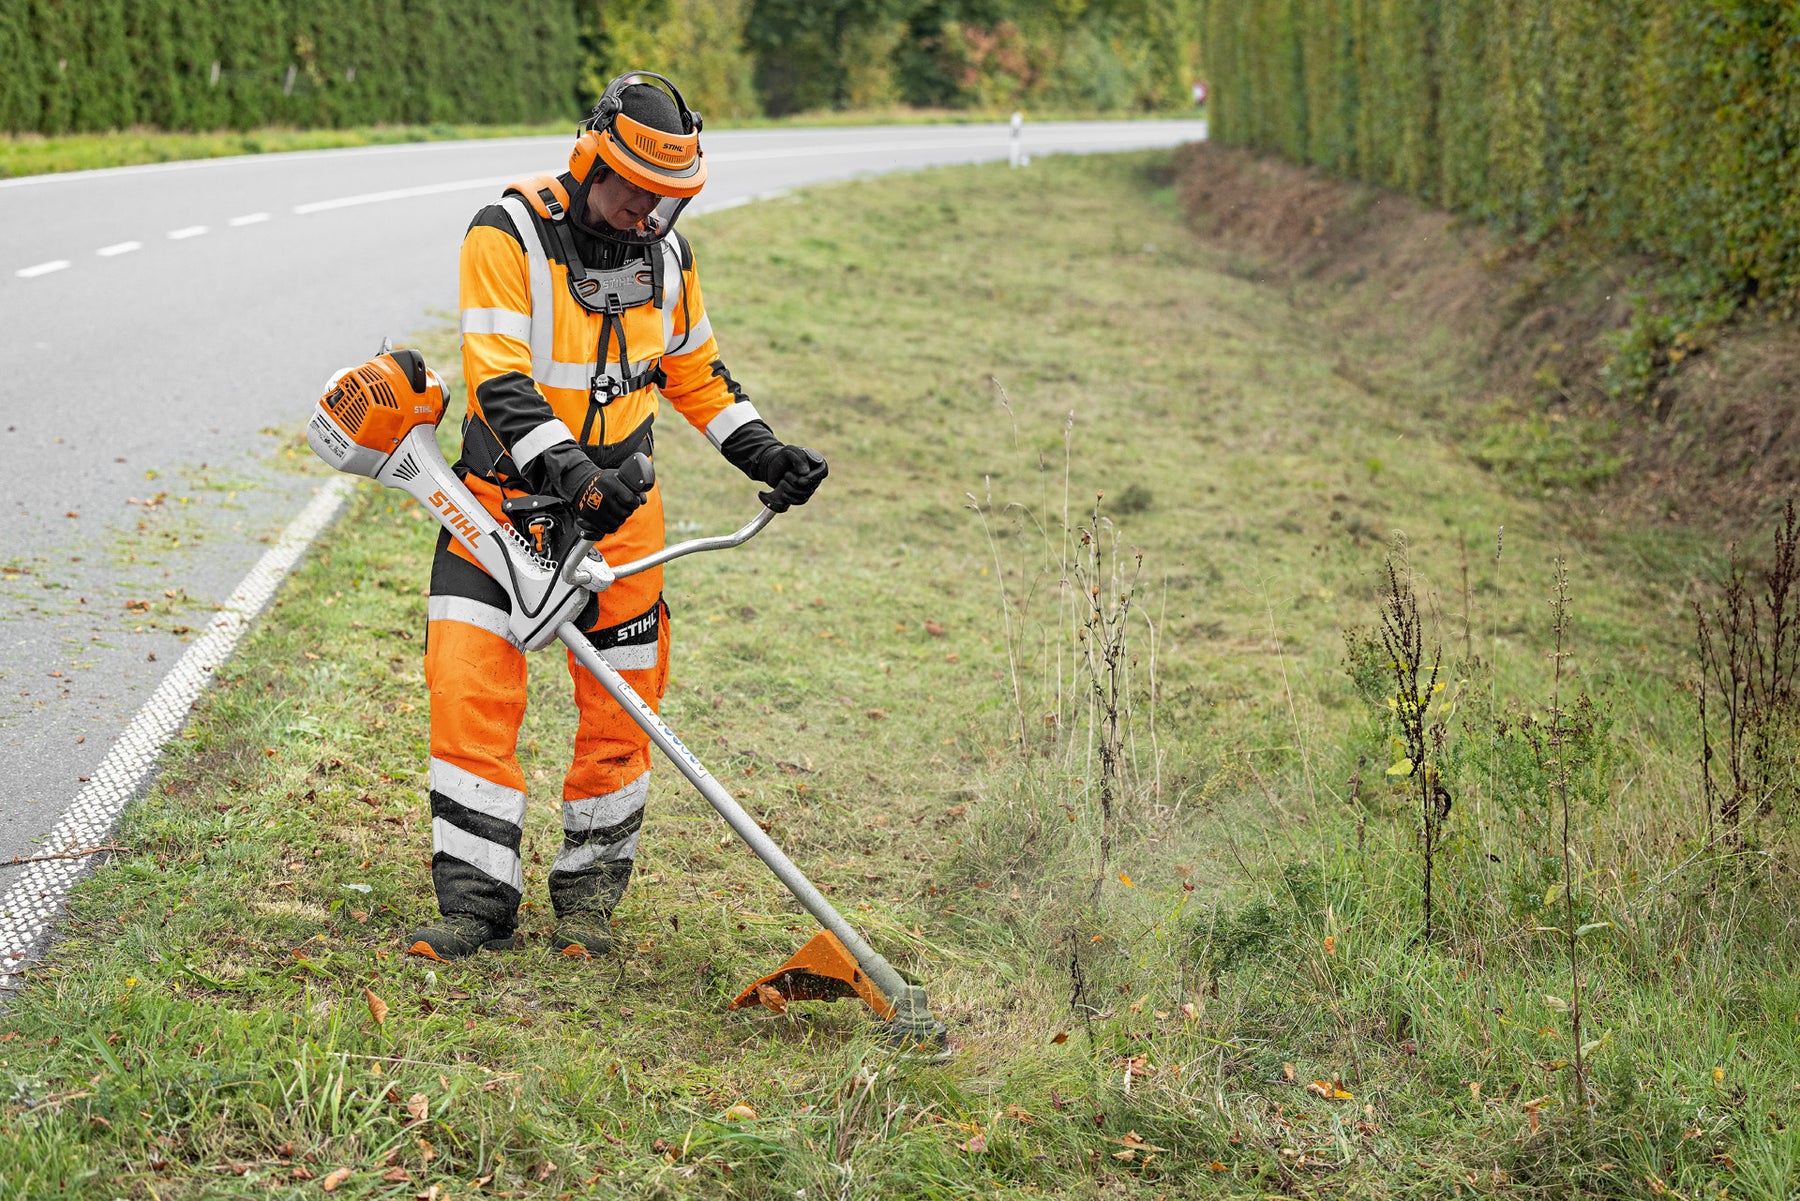 STIHL BRUSHCUTTERS - A BALMERS GM BUYERS GUIDE